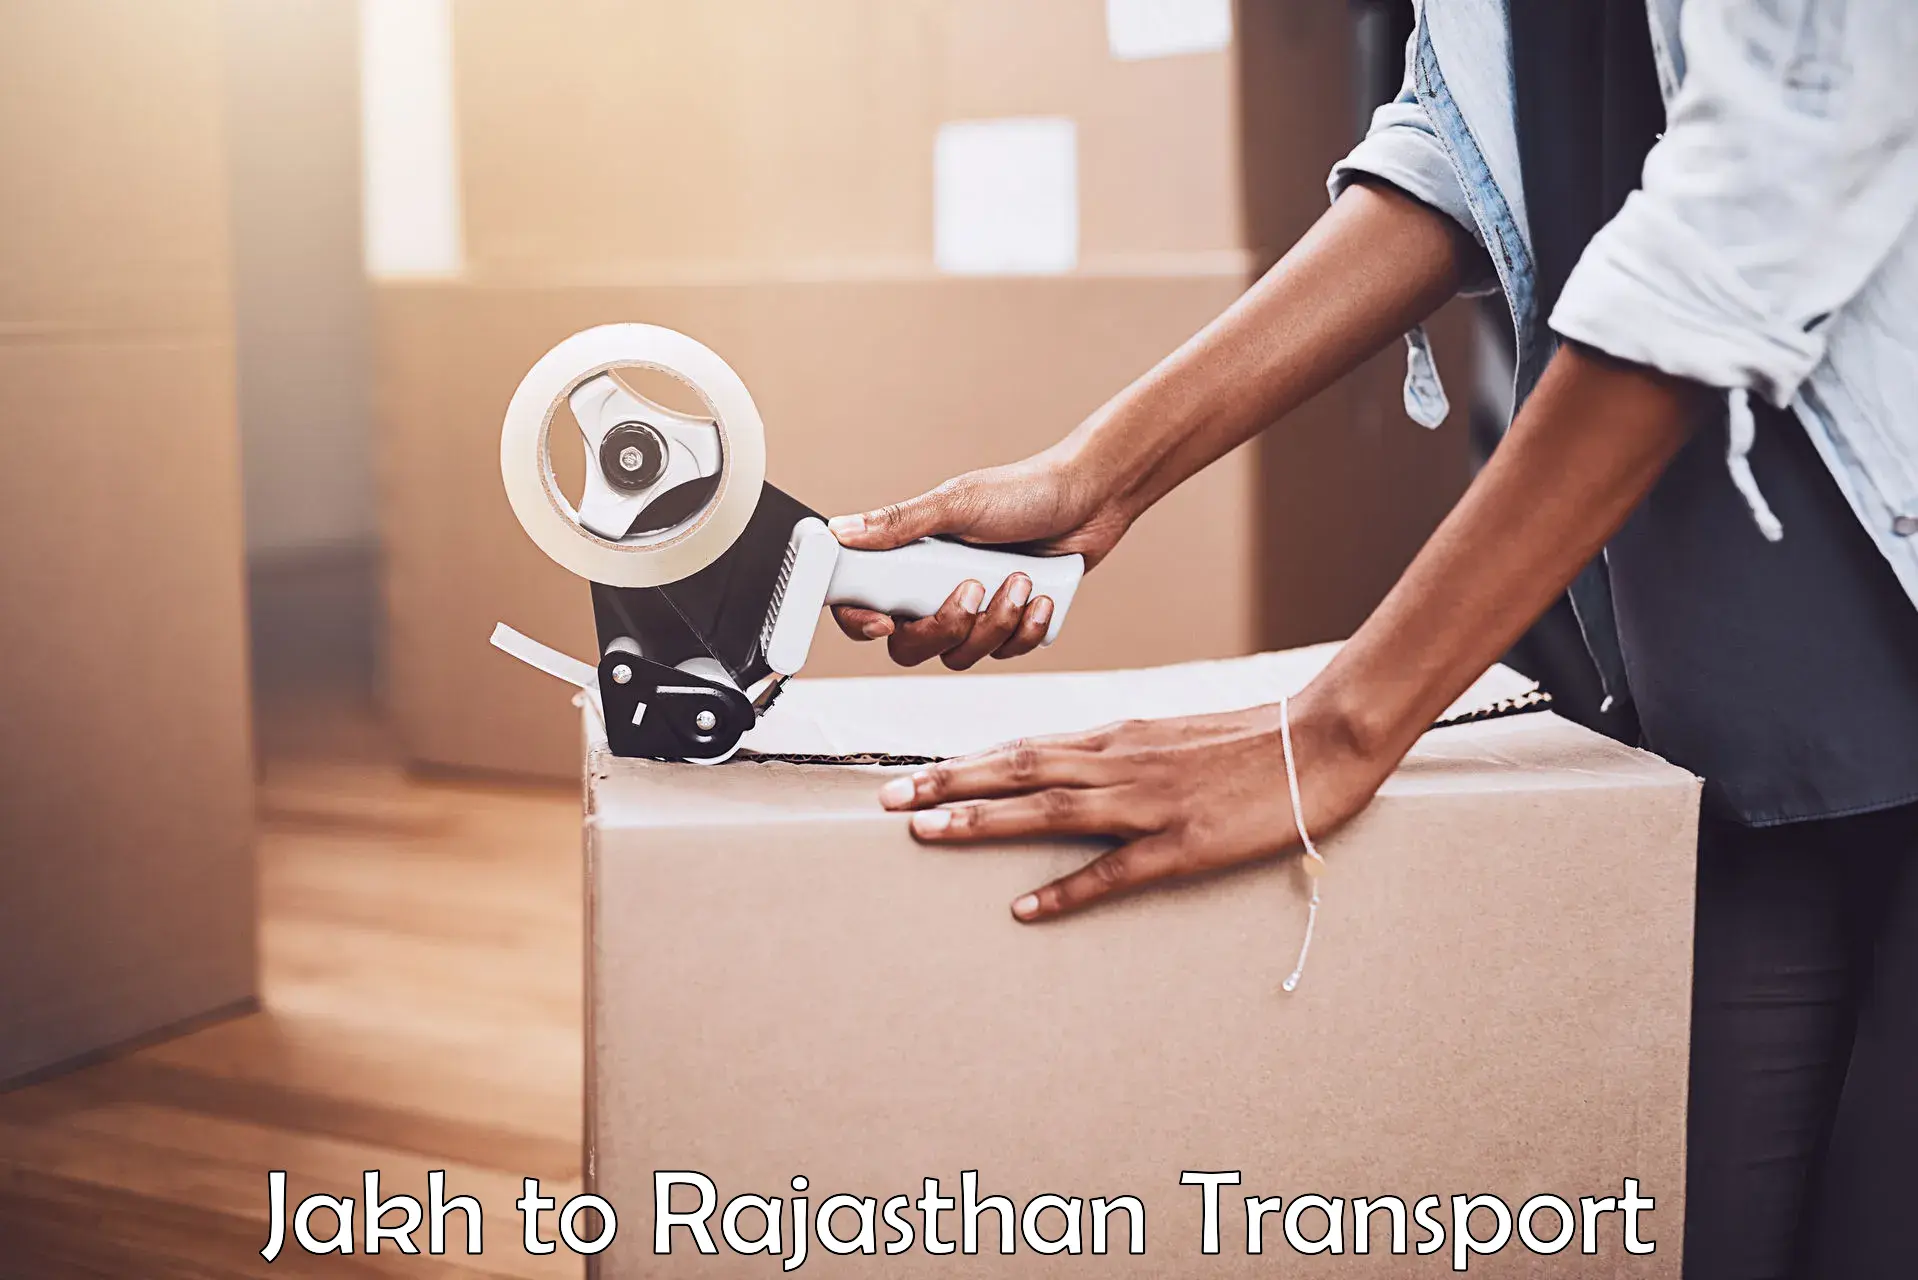 Transport in sharing Jakh to Rajasthan